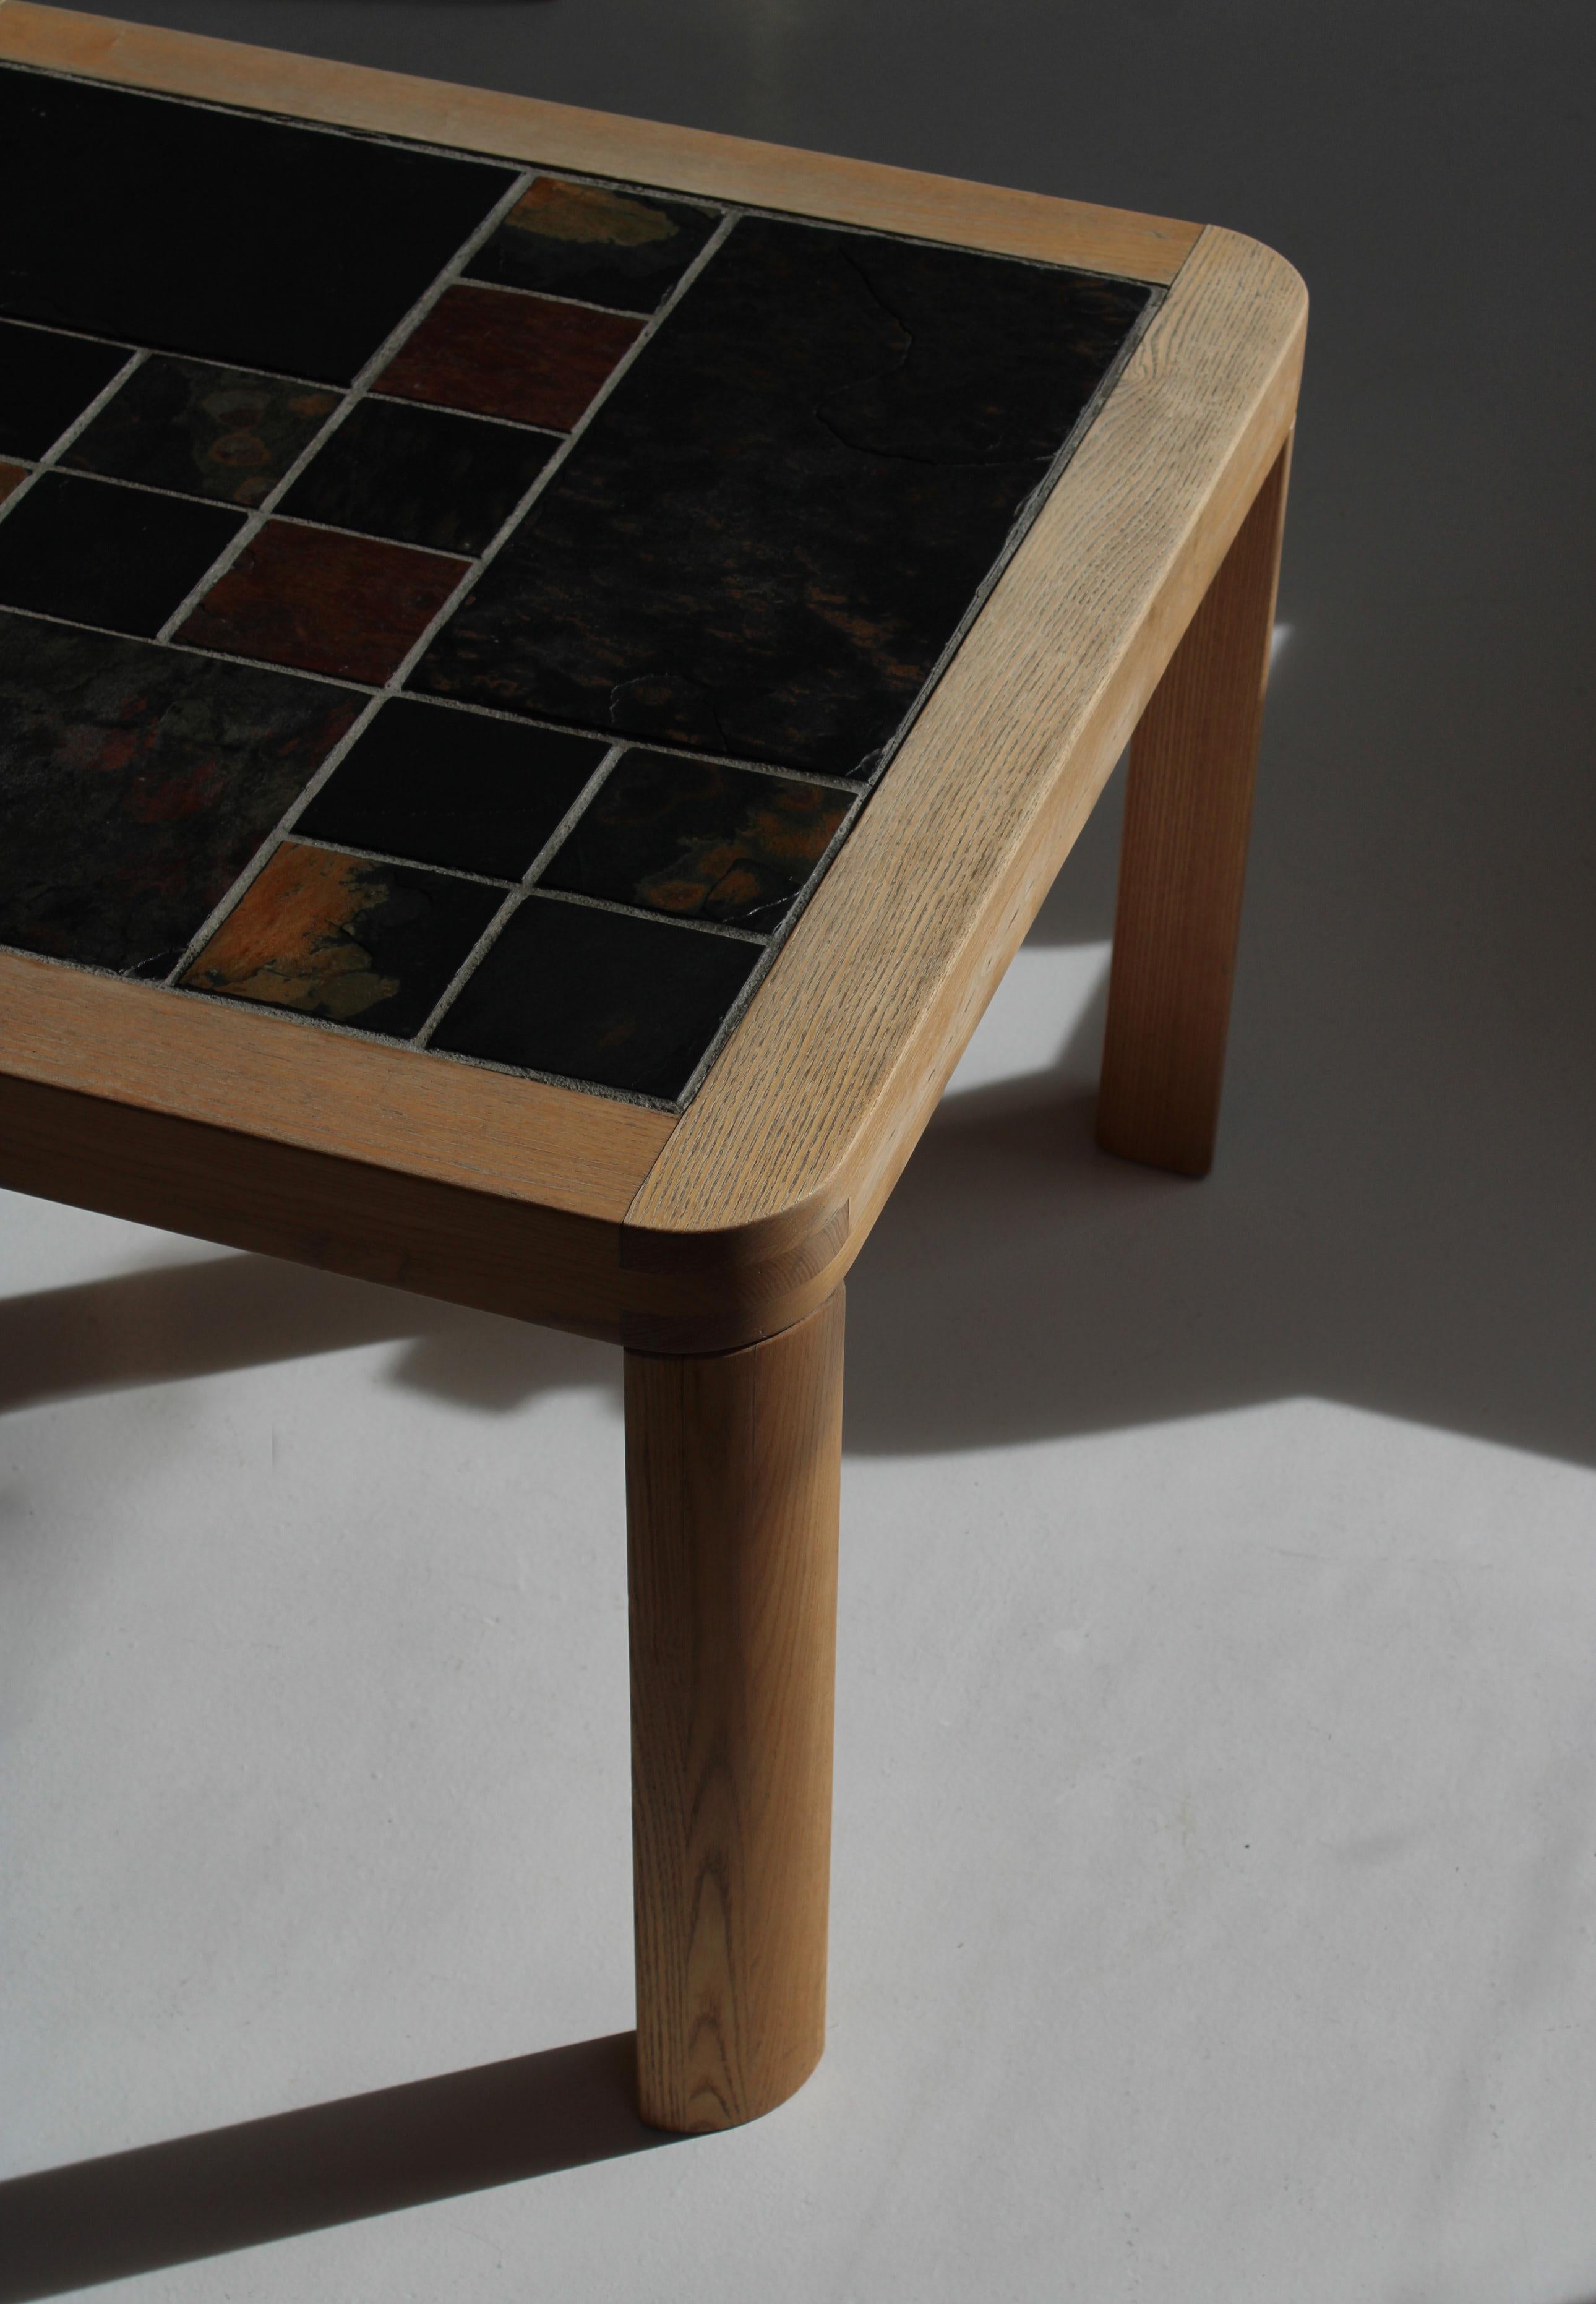 Square Coffee Table in Oak with Slate Top, Haslev Furniture, Denmark, 1970s For Sale 2